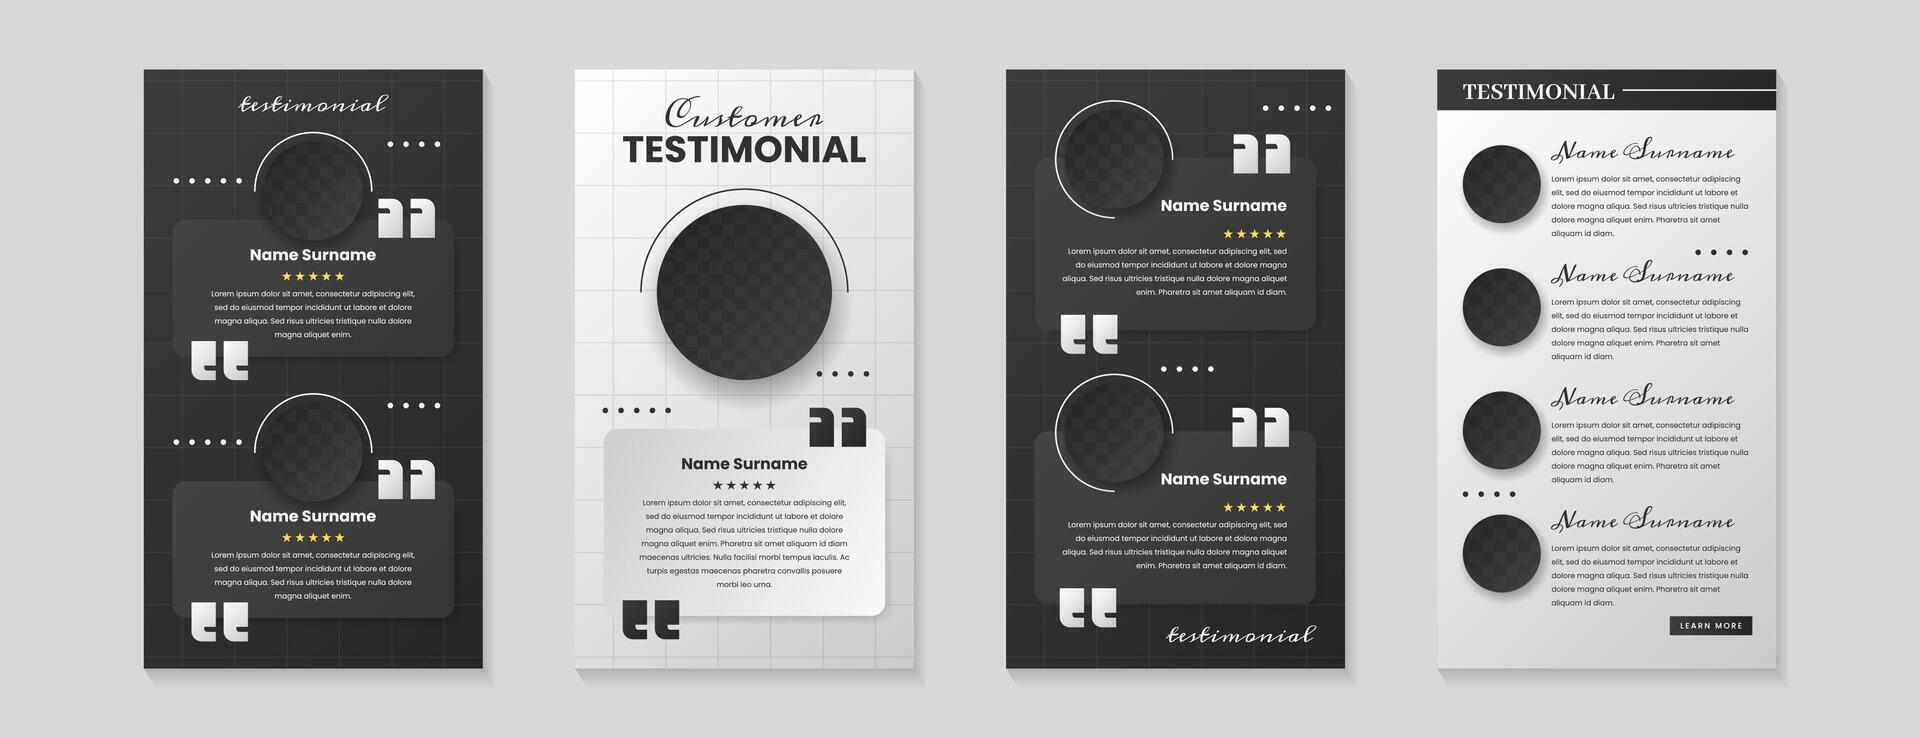 Customer service review template. Product or business rate feedback. Set of testimonial posts, web banners of client satisfaction with star rating. Testimonials design with opinion, user icon, comment vector